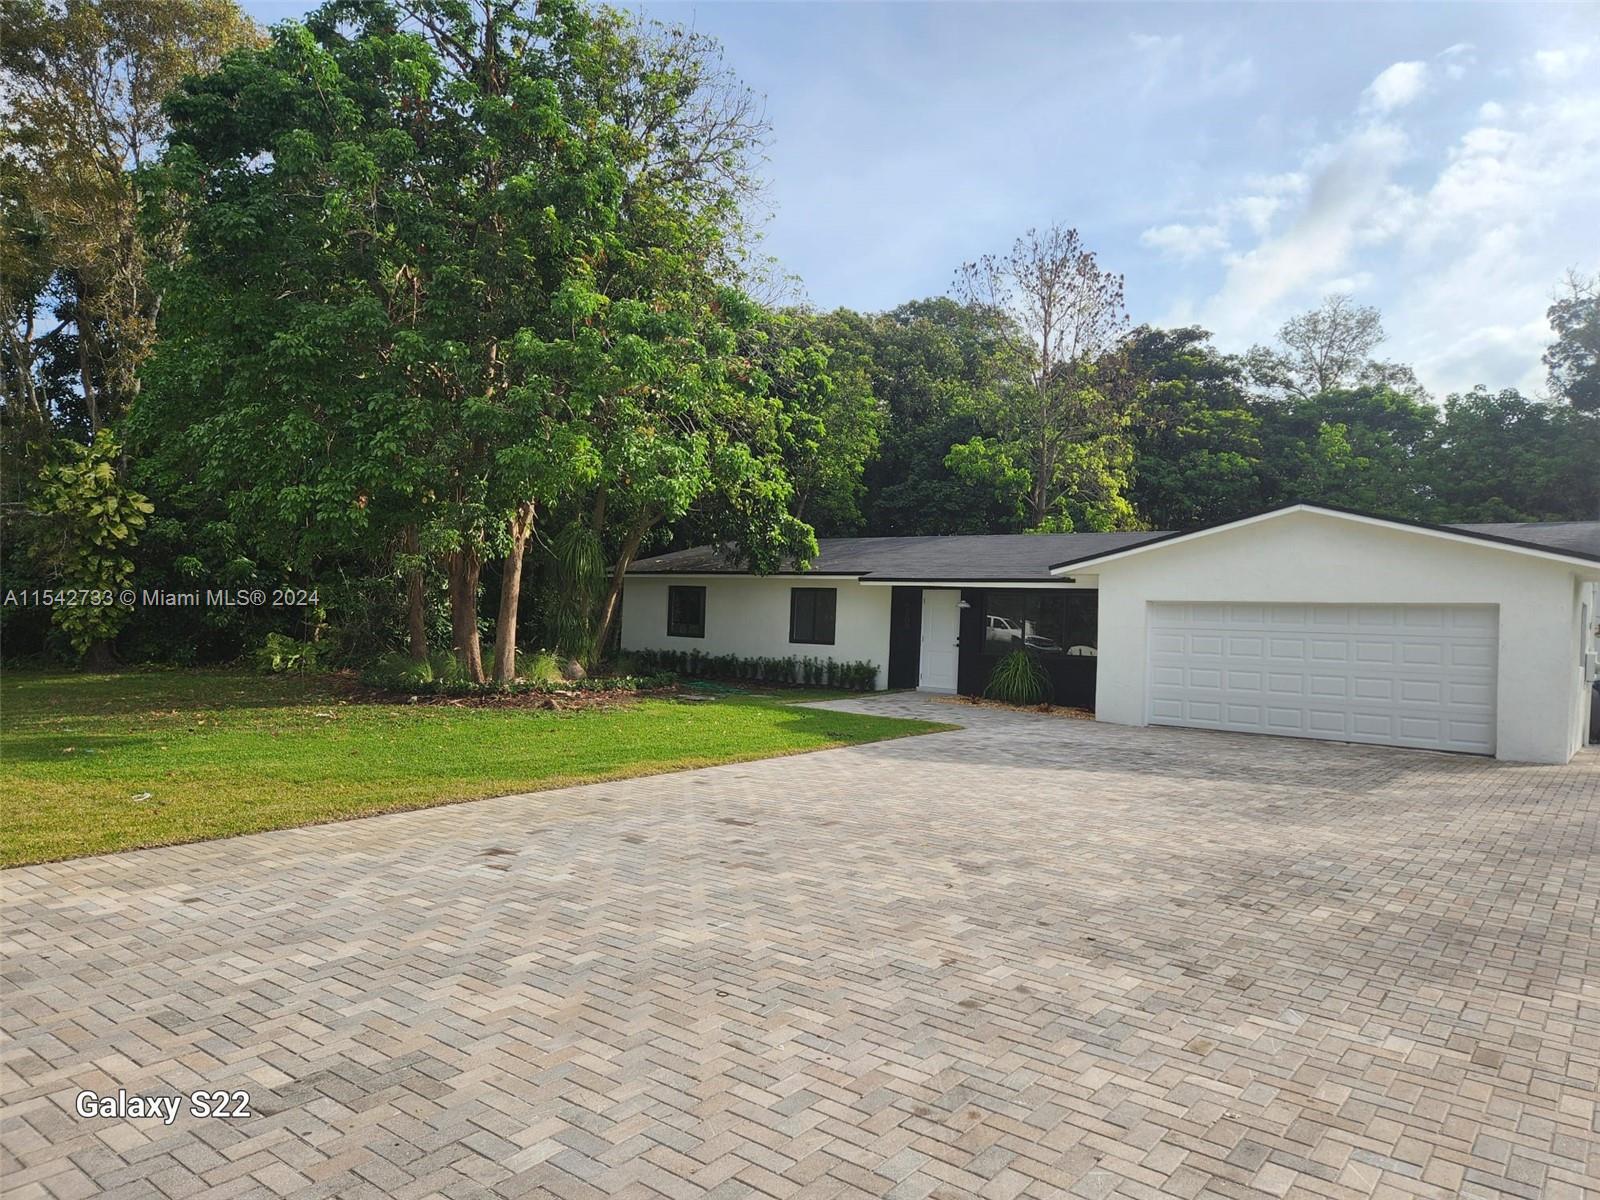 5000 SW 193rd Ln 0, Southwest Ranches, Florida 33332, 3 Bedrooms Bedrooms, ,2 BathroomsBathrooms,Residentiallease,For Rent,5000 SW 193rd Ln 0,A11542733